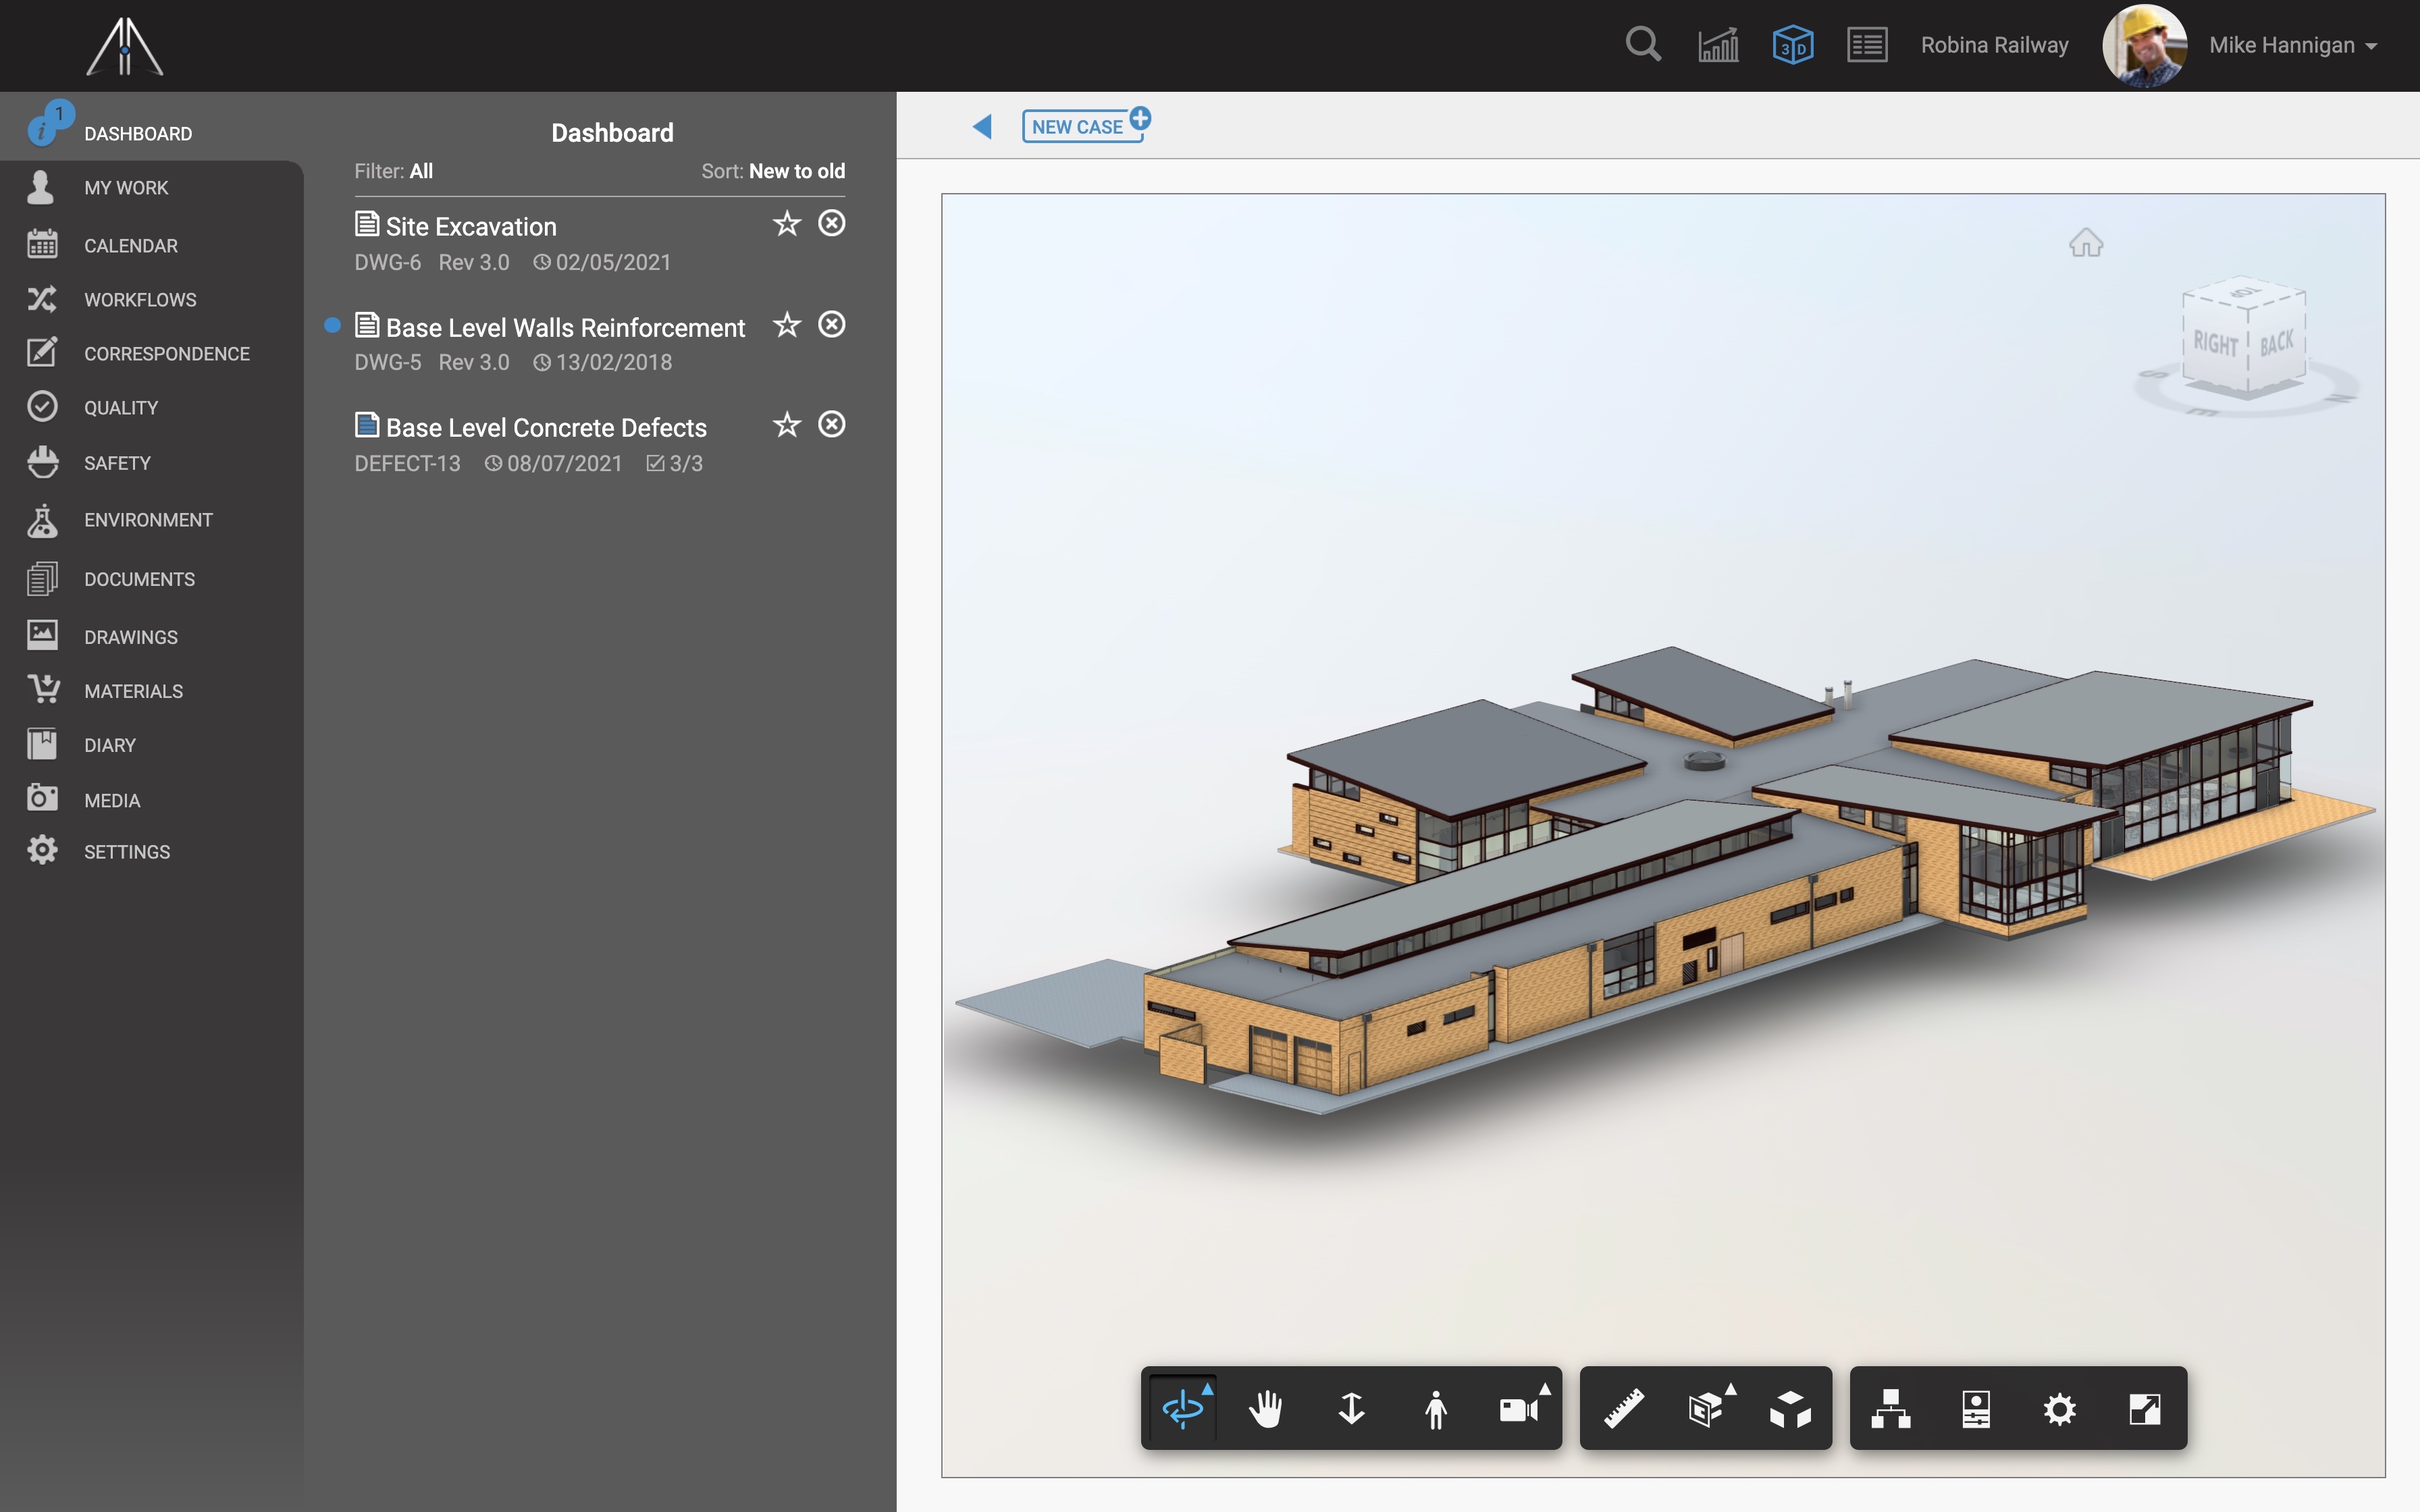 BIM models can be linked to Glaass projects